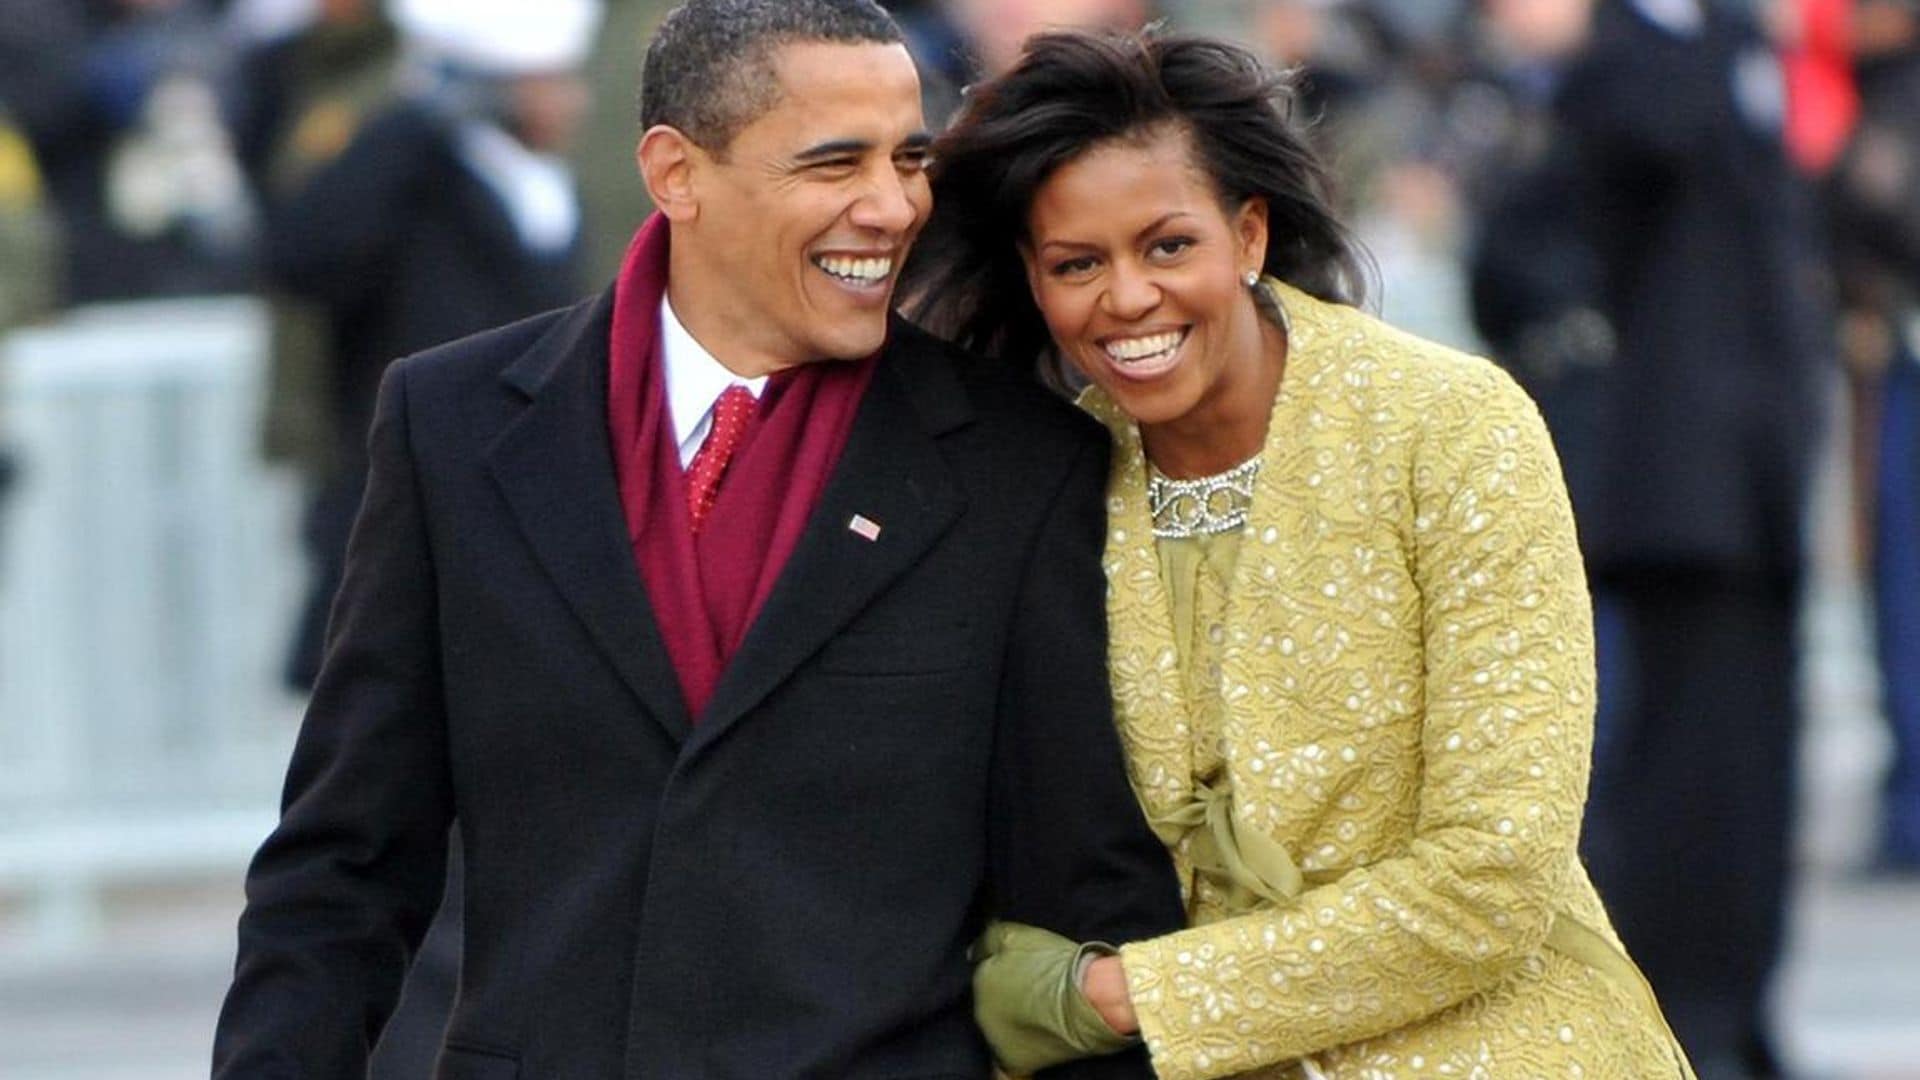 Michelle Obama reveals why she fell in love with Barack Obama